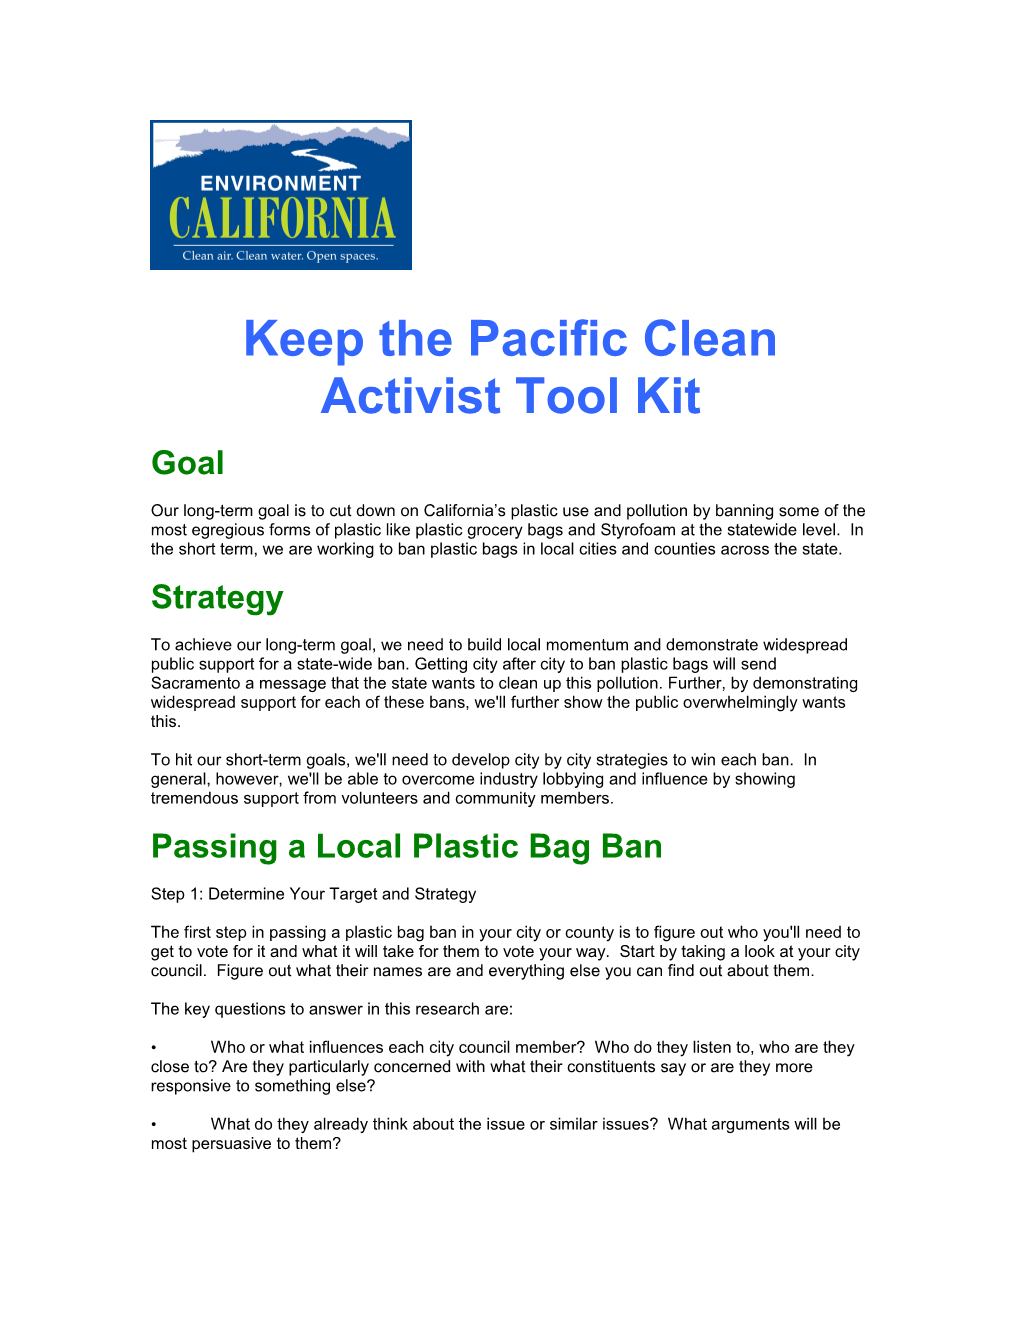 Keep the Pacific Clean Activist Tool Kit